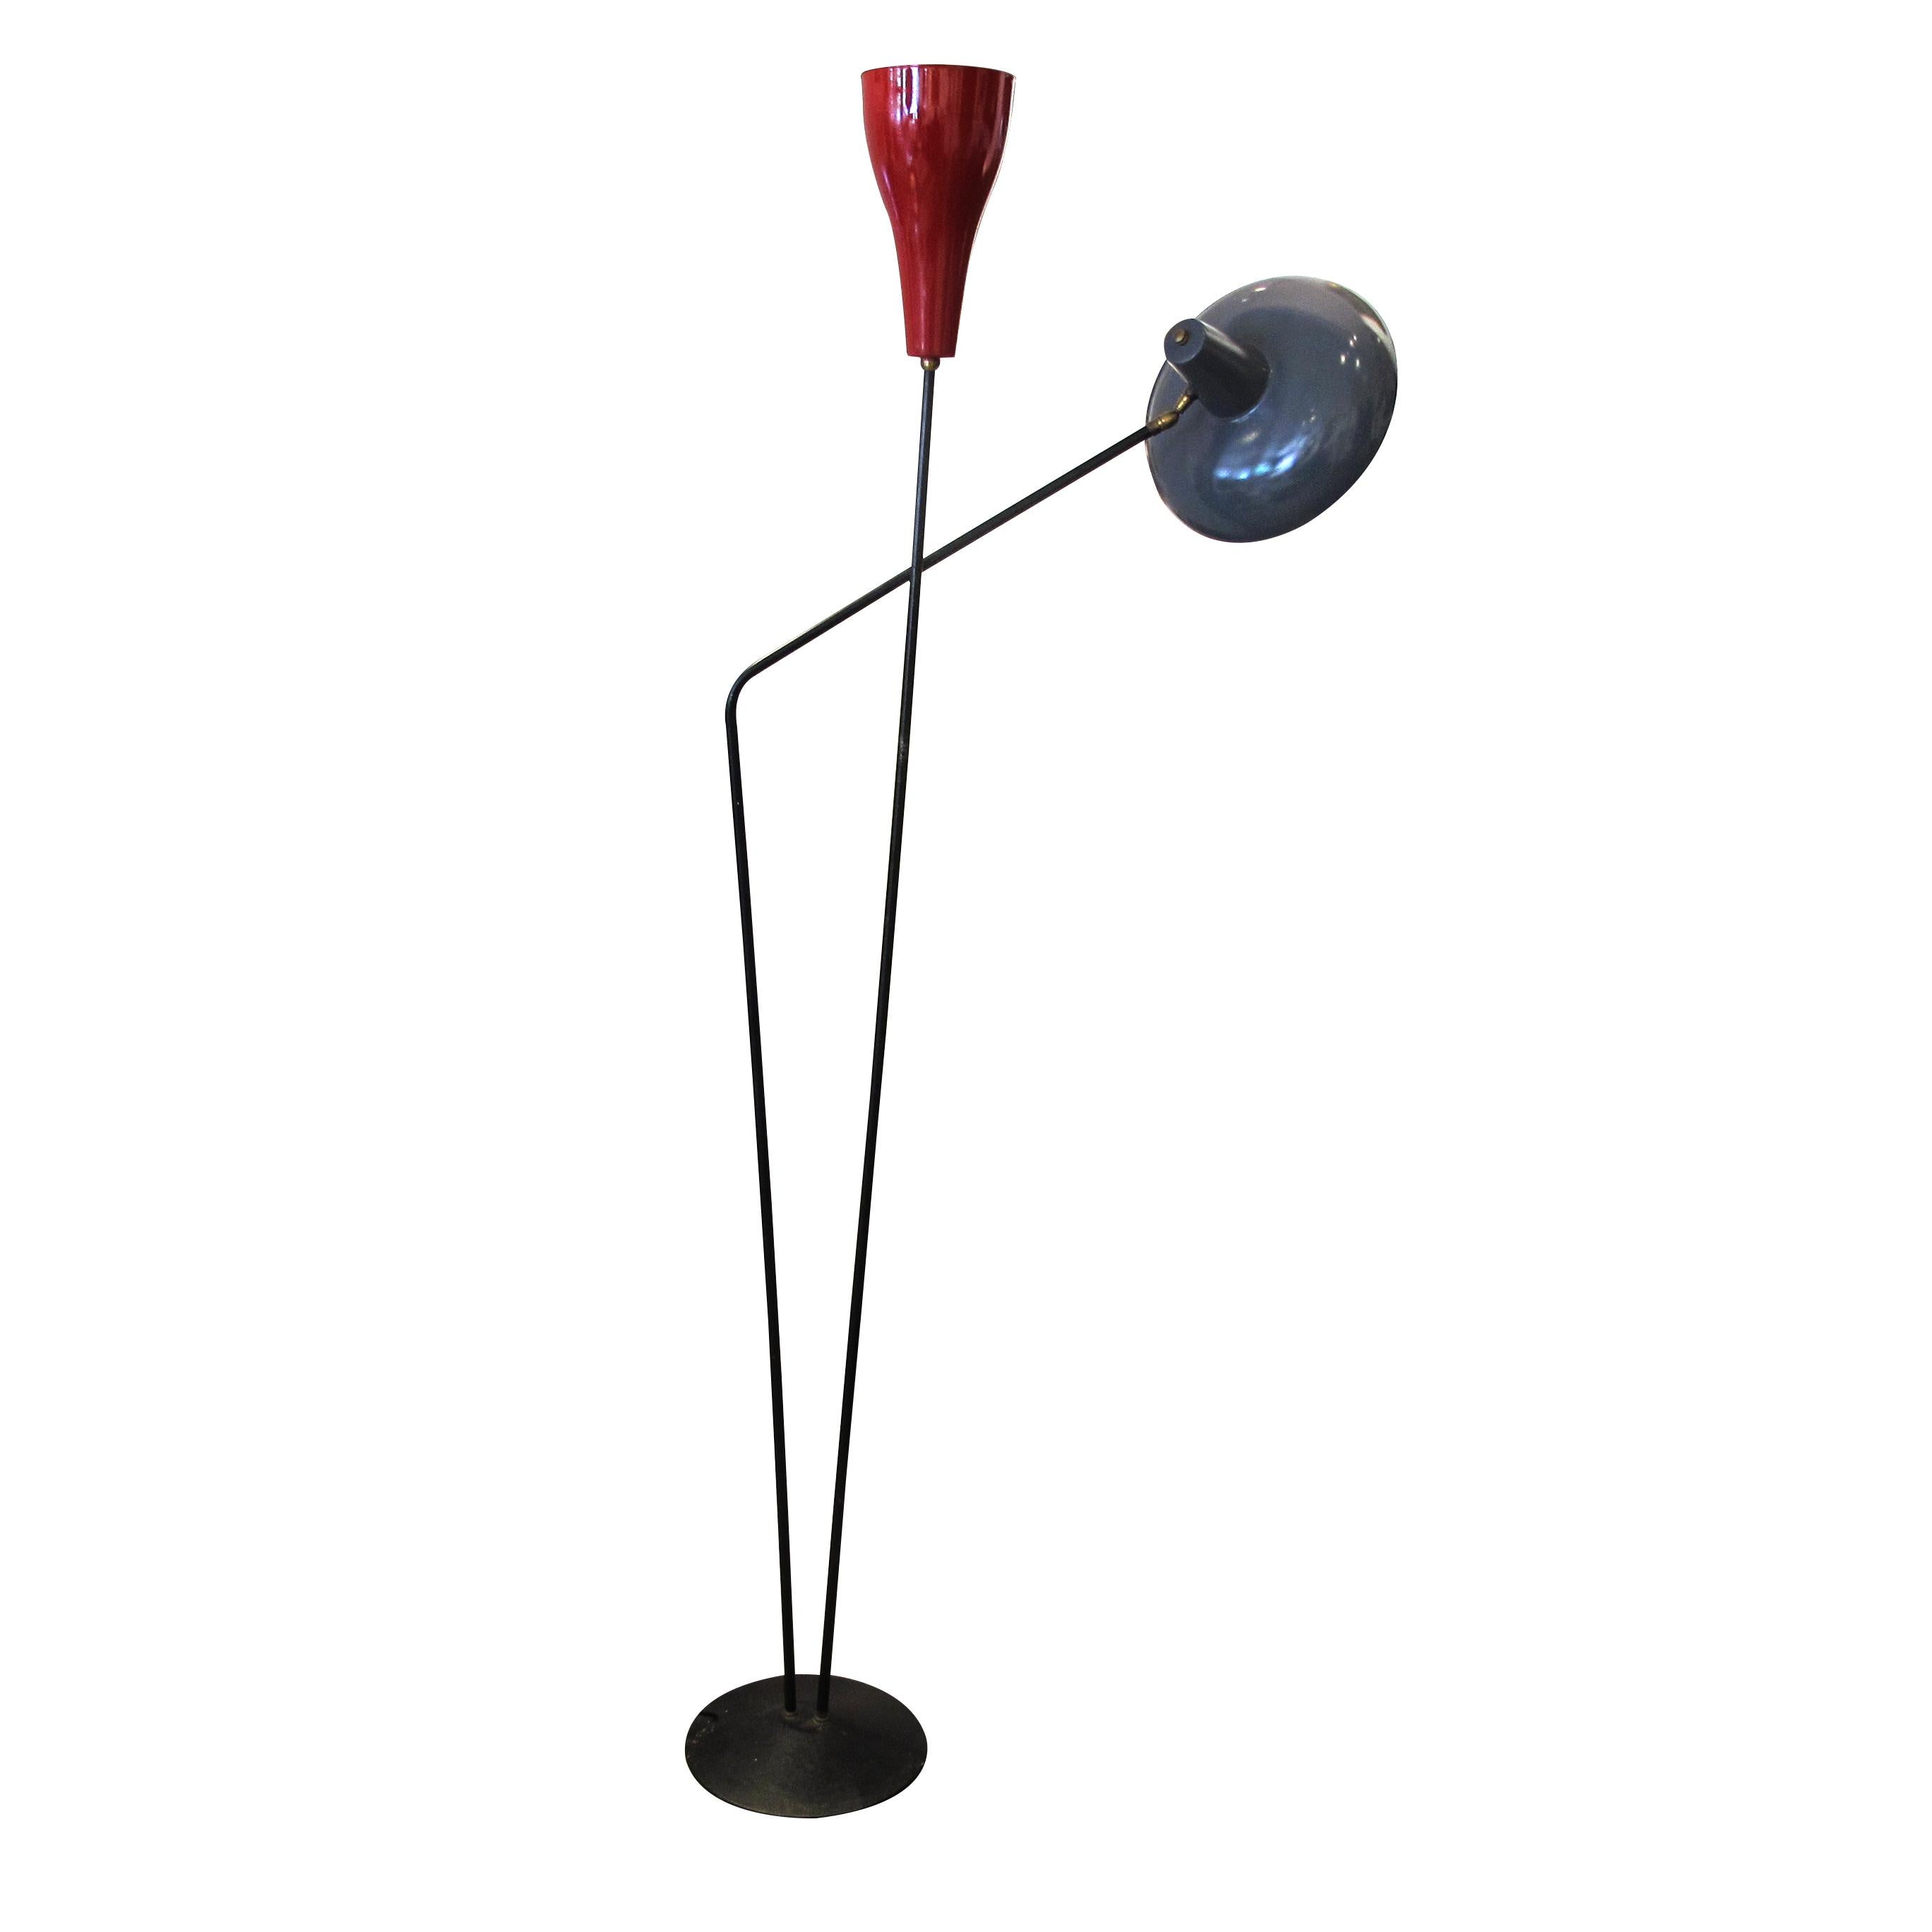 1950s mid century Italian floor lamp with two metal painted reflector shades. The red tulip shade is in a fixed upright position pointing upwards and the grey round shade facing downwards can be adjusted into various positions which allows you to